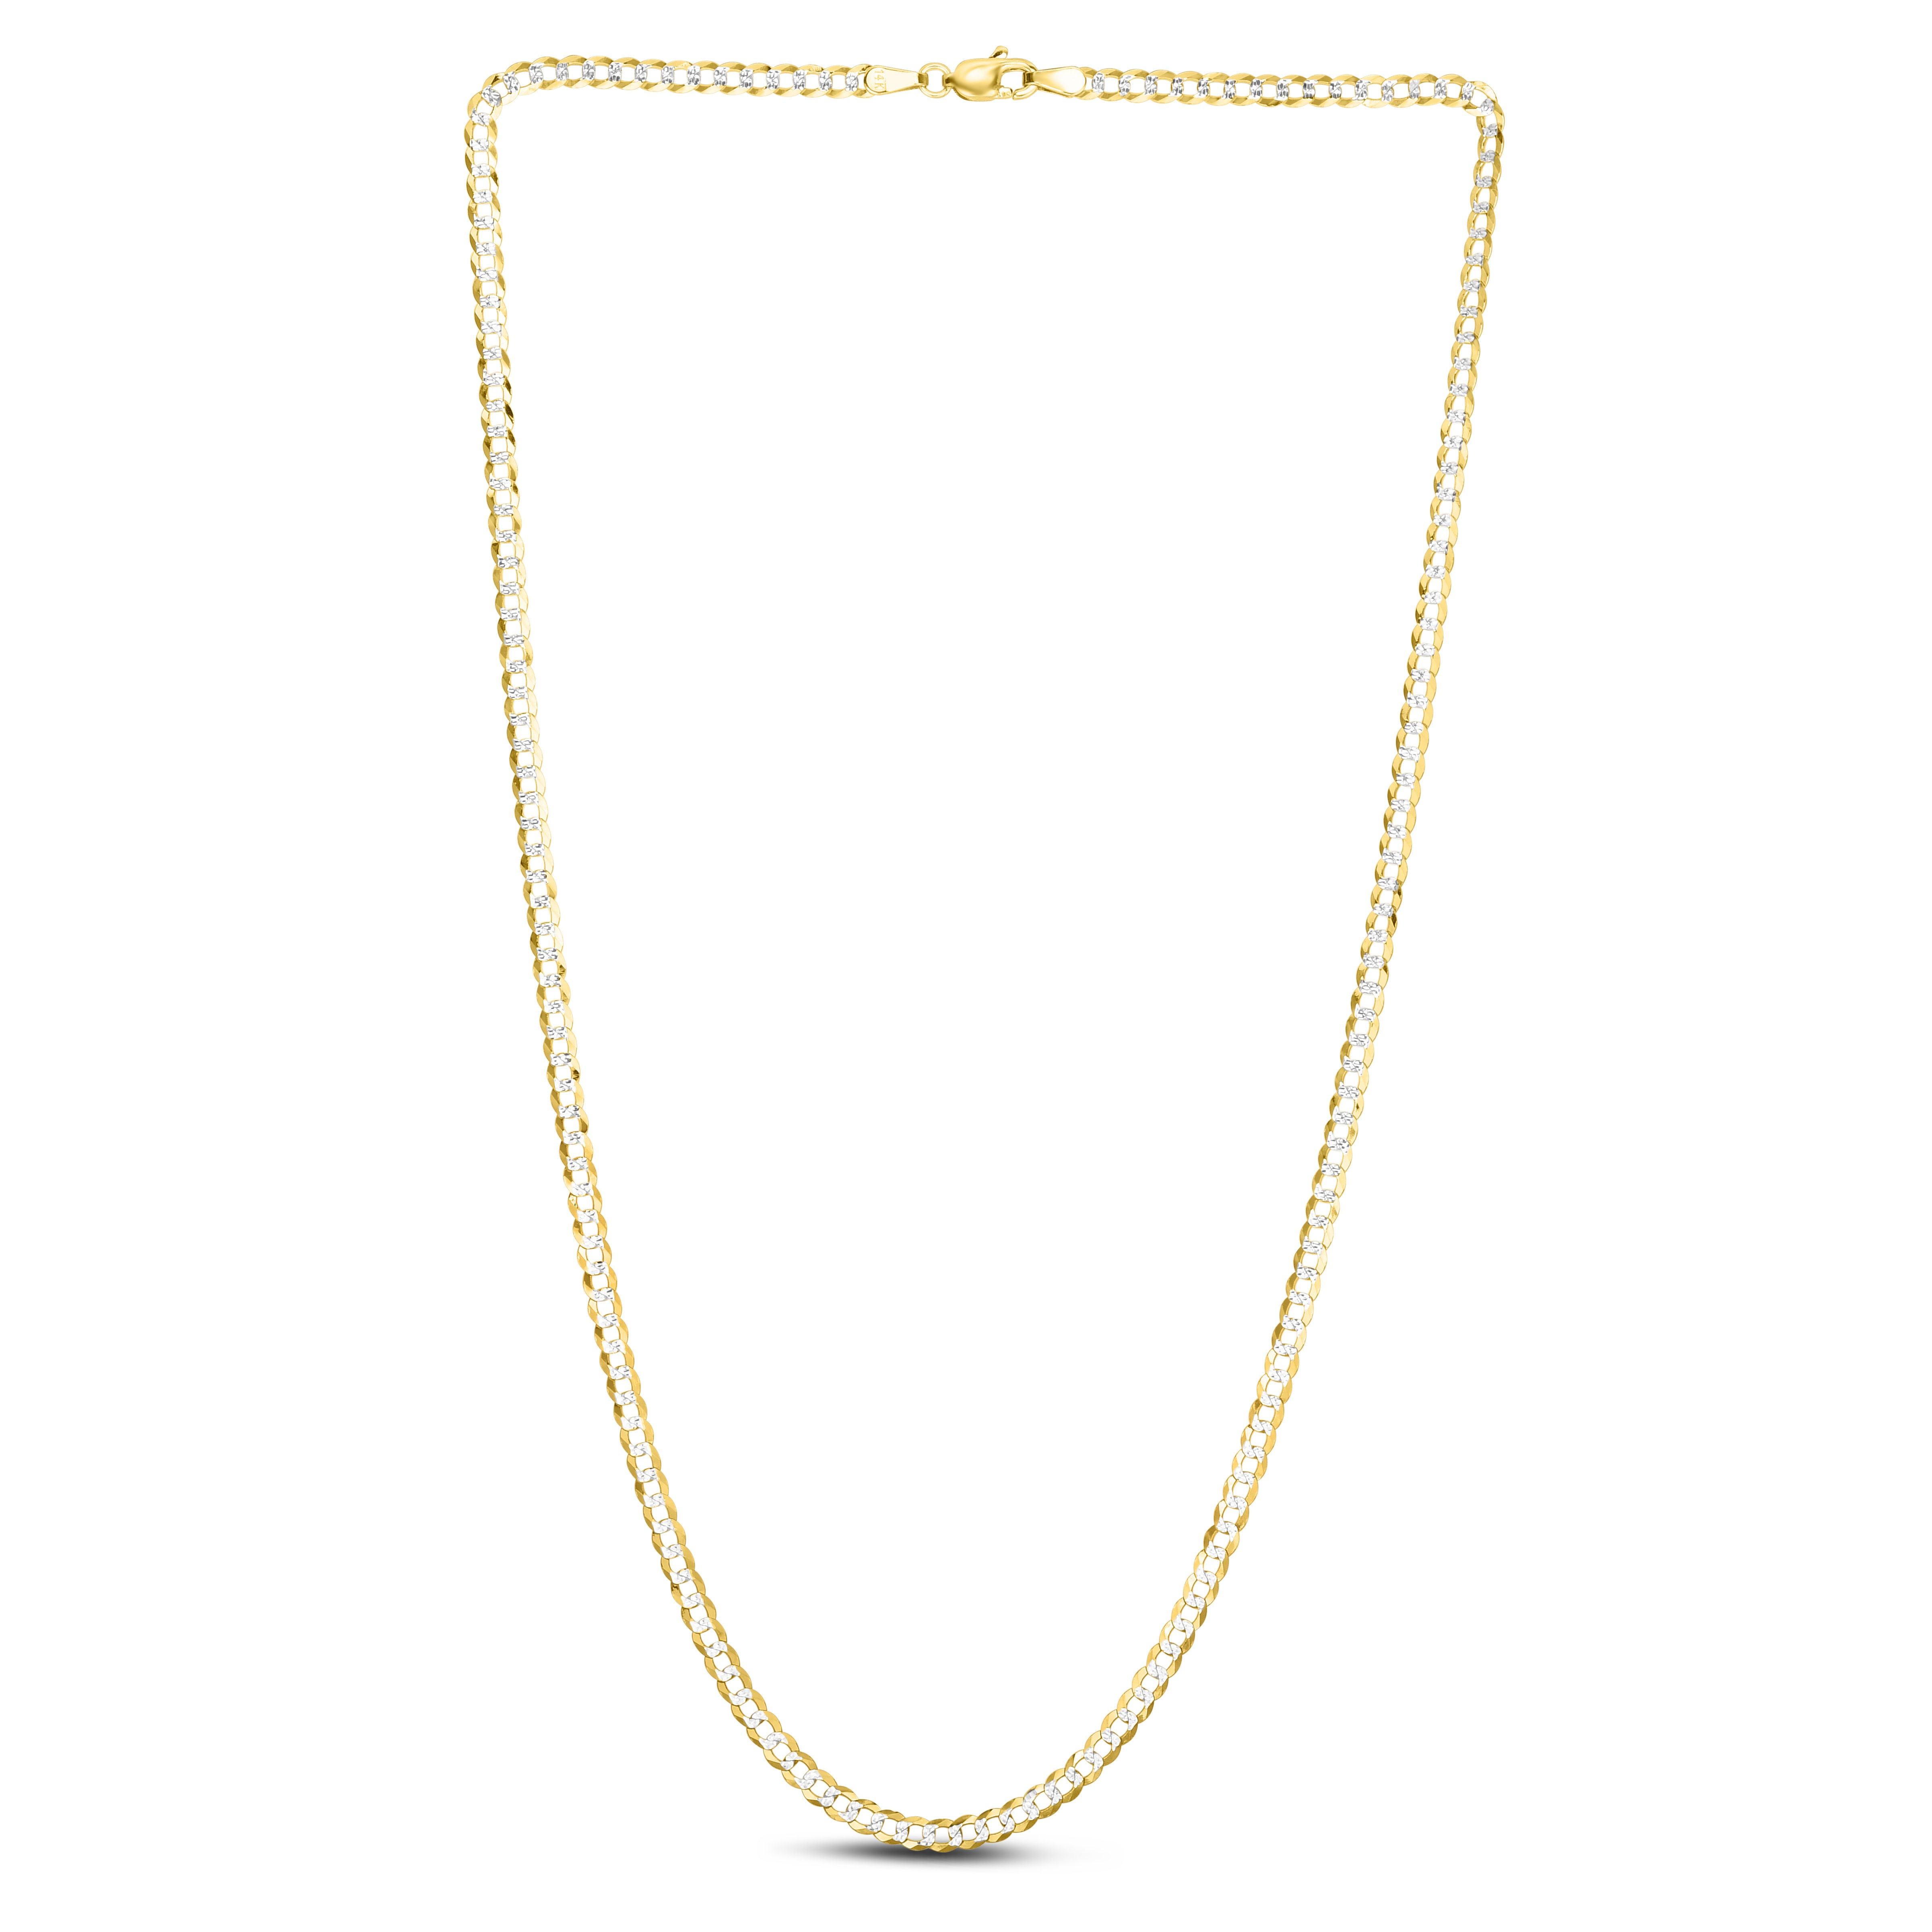 14K Gold 3.2mm White Pave Curb Chain